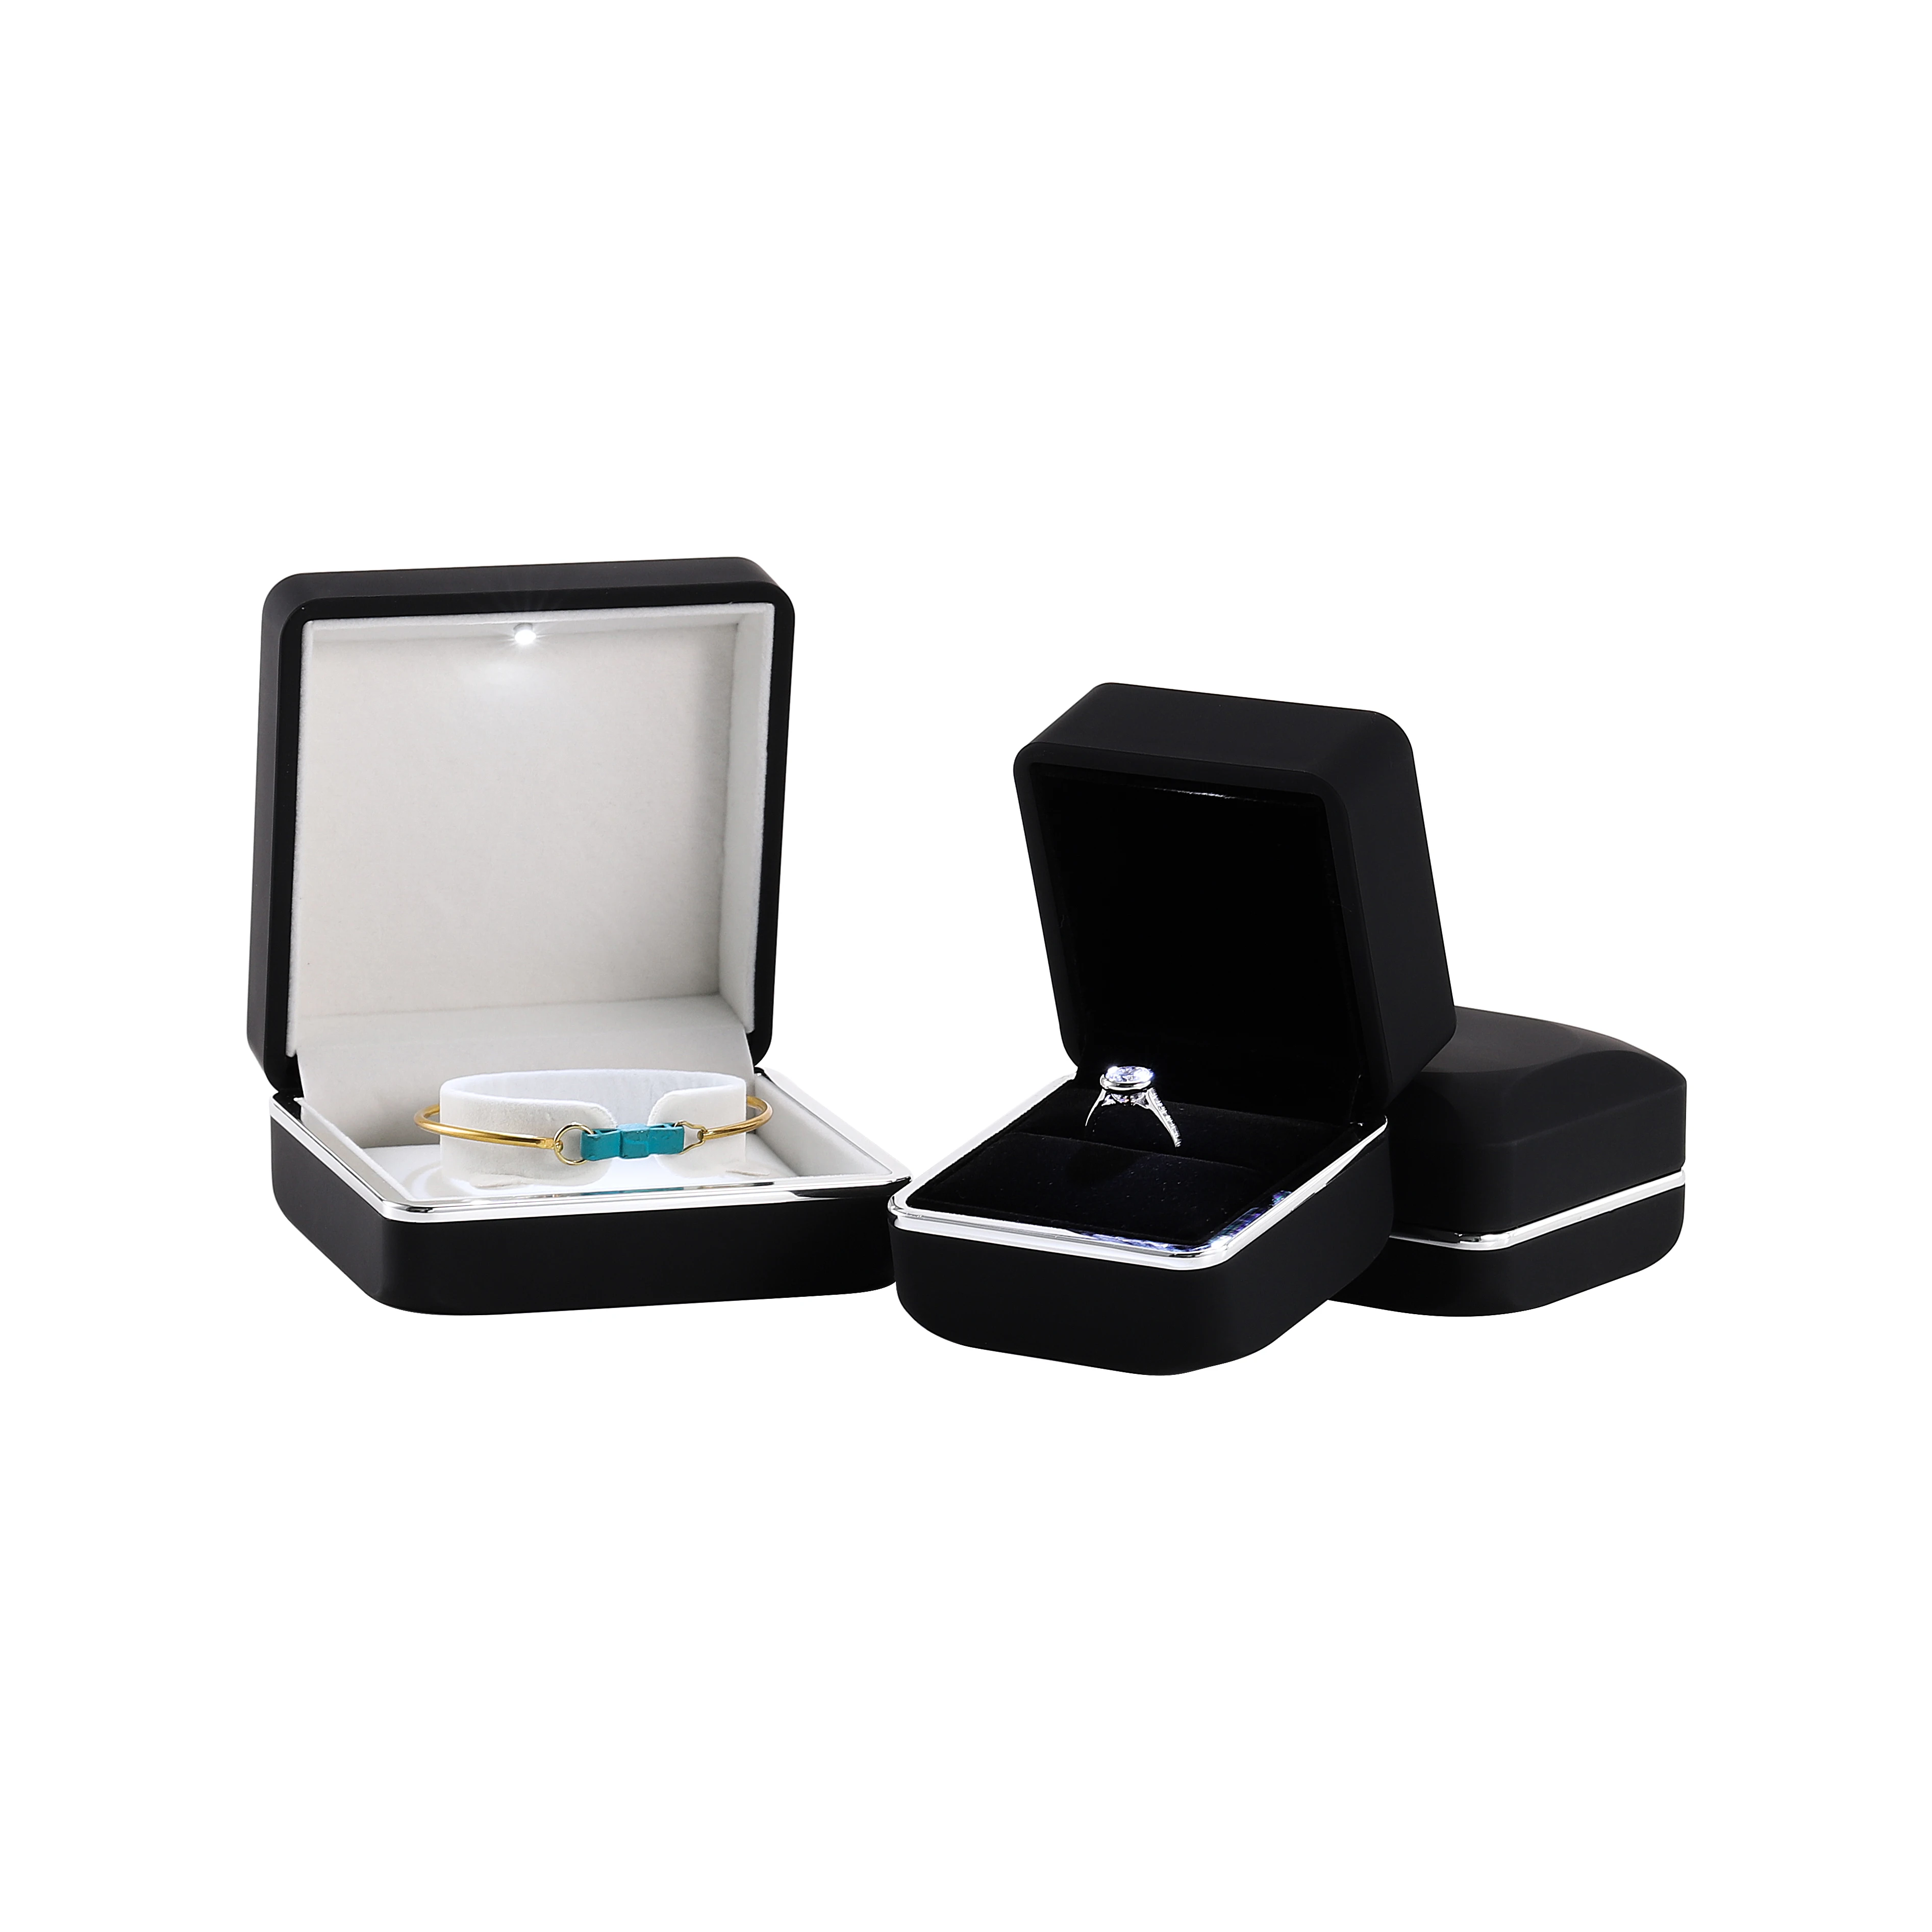 Top quality promotional customized plastic velvet painted engagement ring and bracelet jewelry packaging boxes with LED light